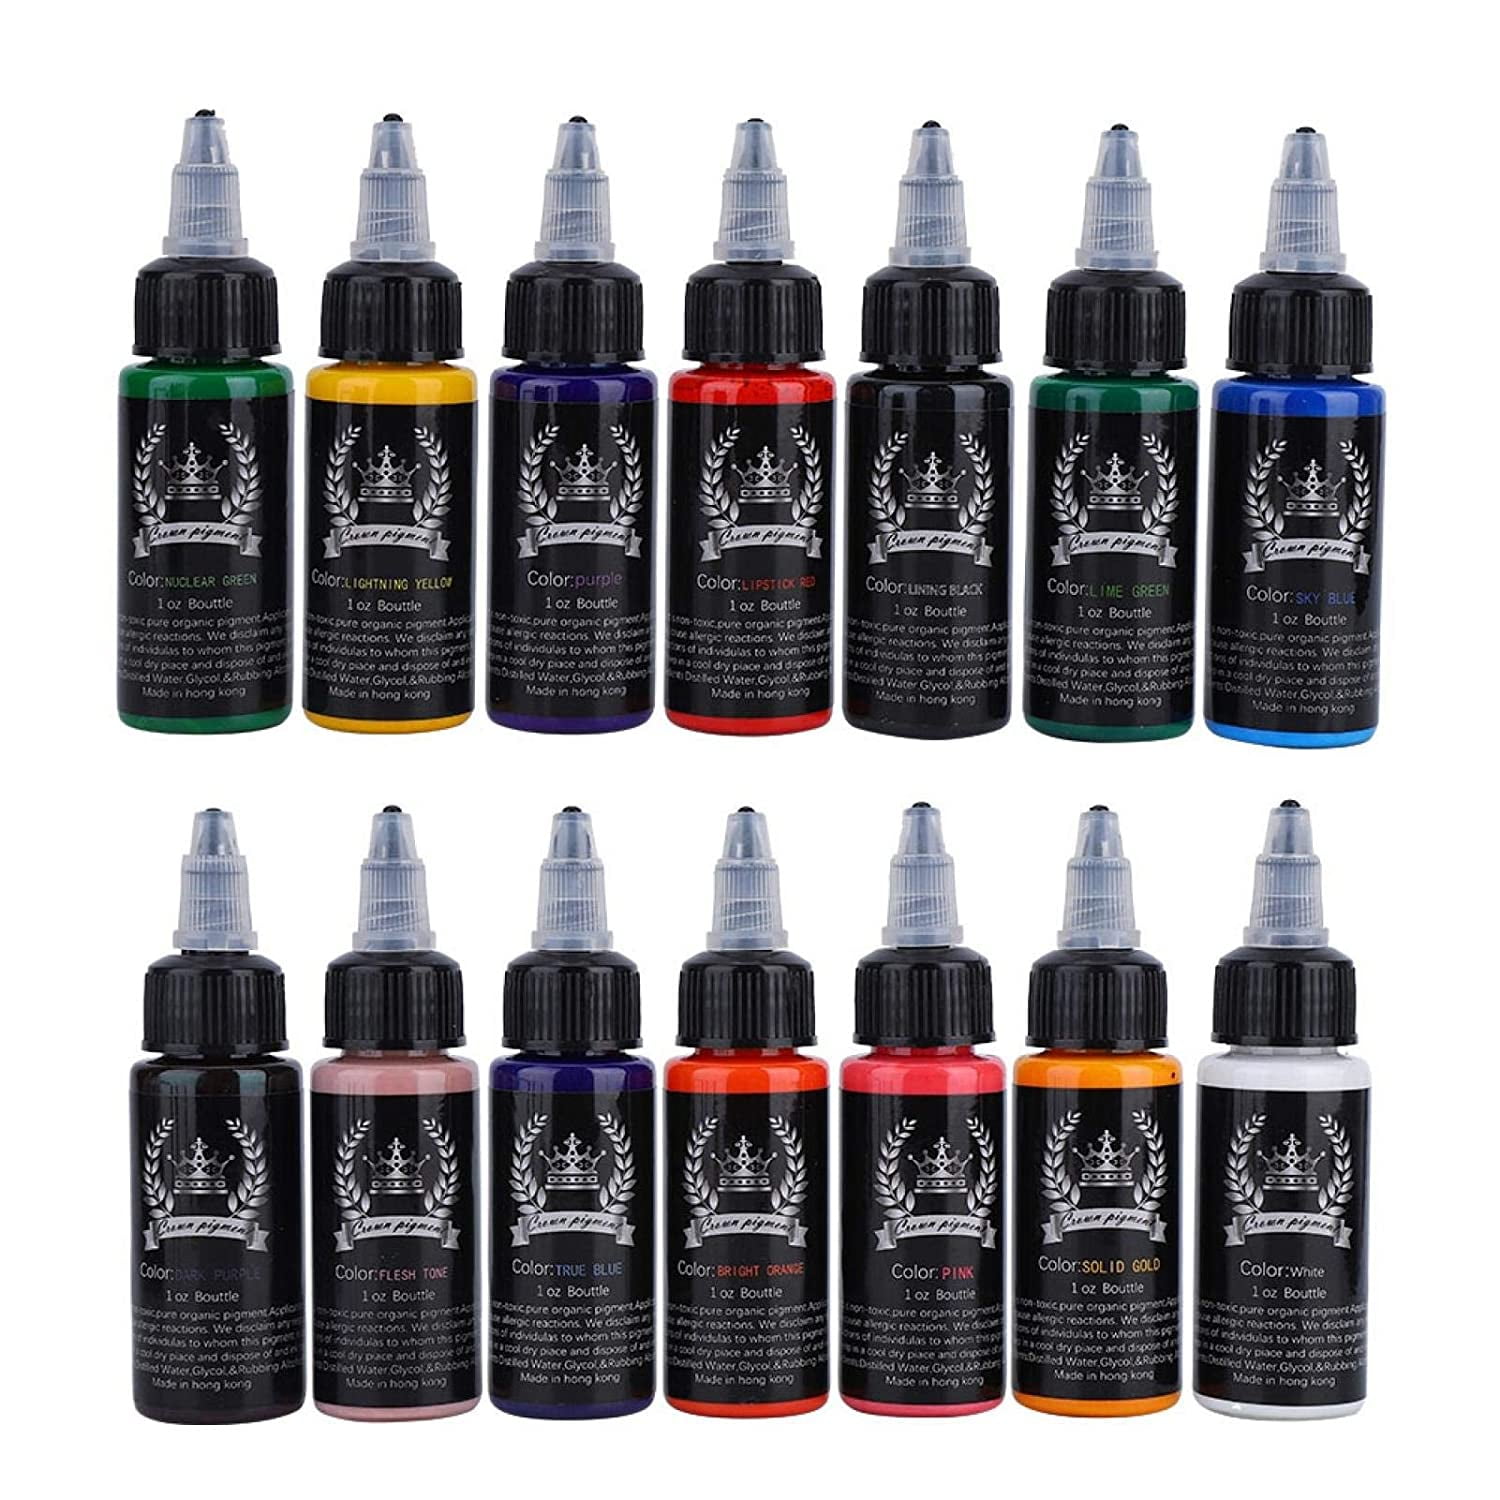 Hao Tattoo Ink 40pack Primary Color Set 016oz Bottles Buy Hao Tattoo Ink